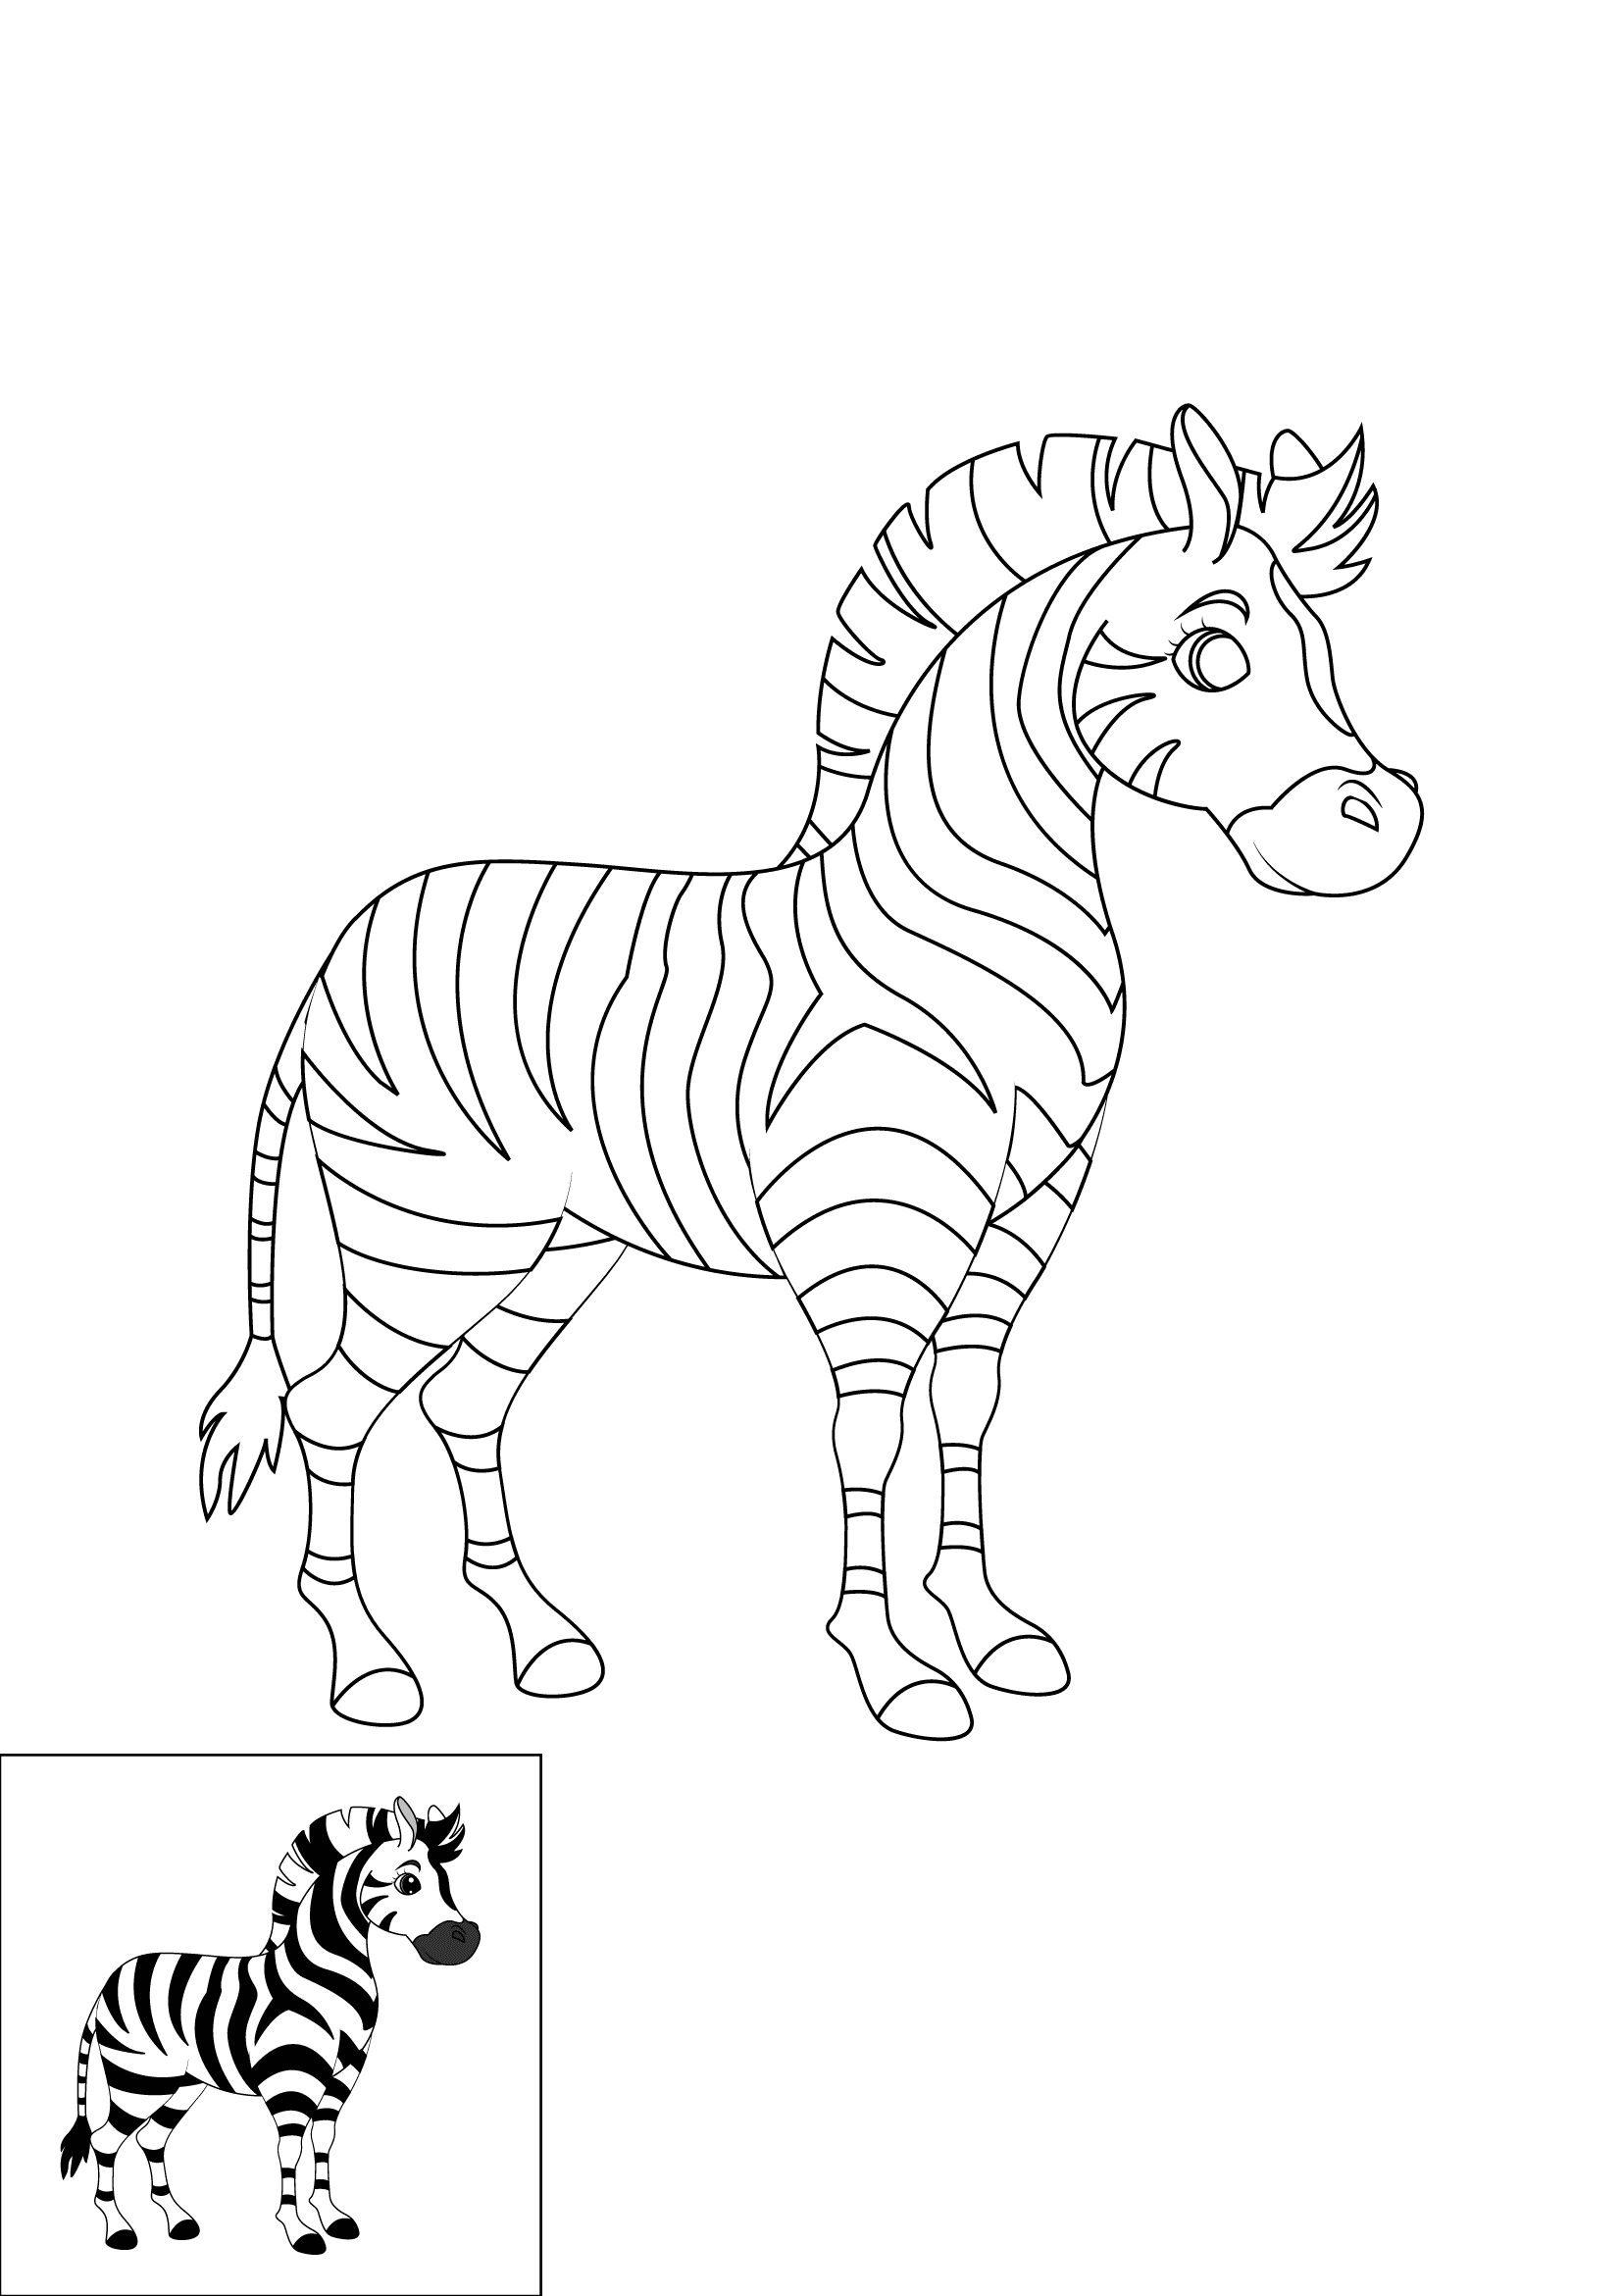 How to Draw A Zebra Step by Step Printable Color